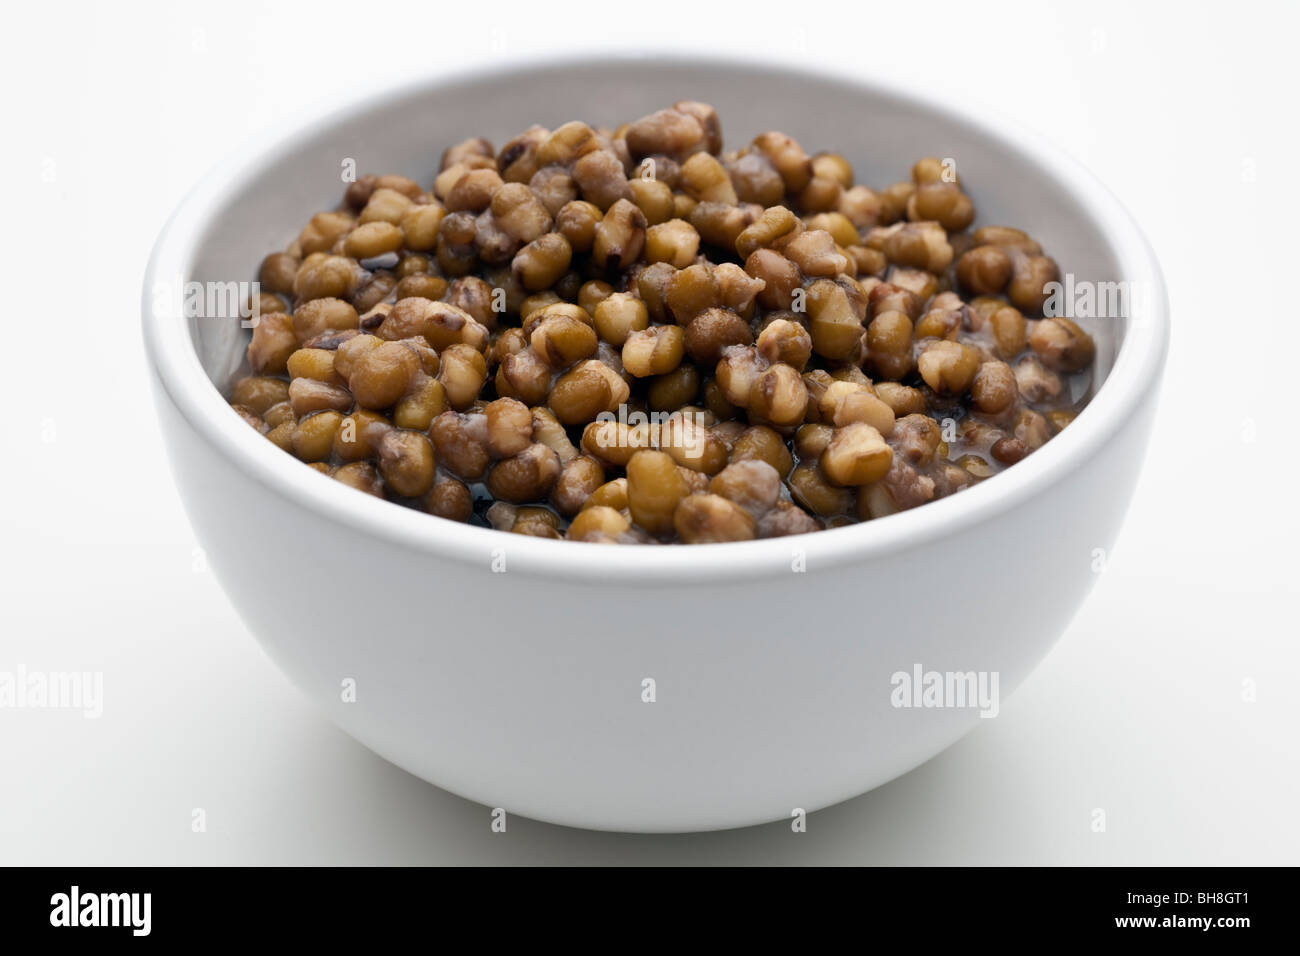 Dish full of cooked Mung beans in water Stock Photo